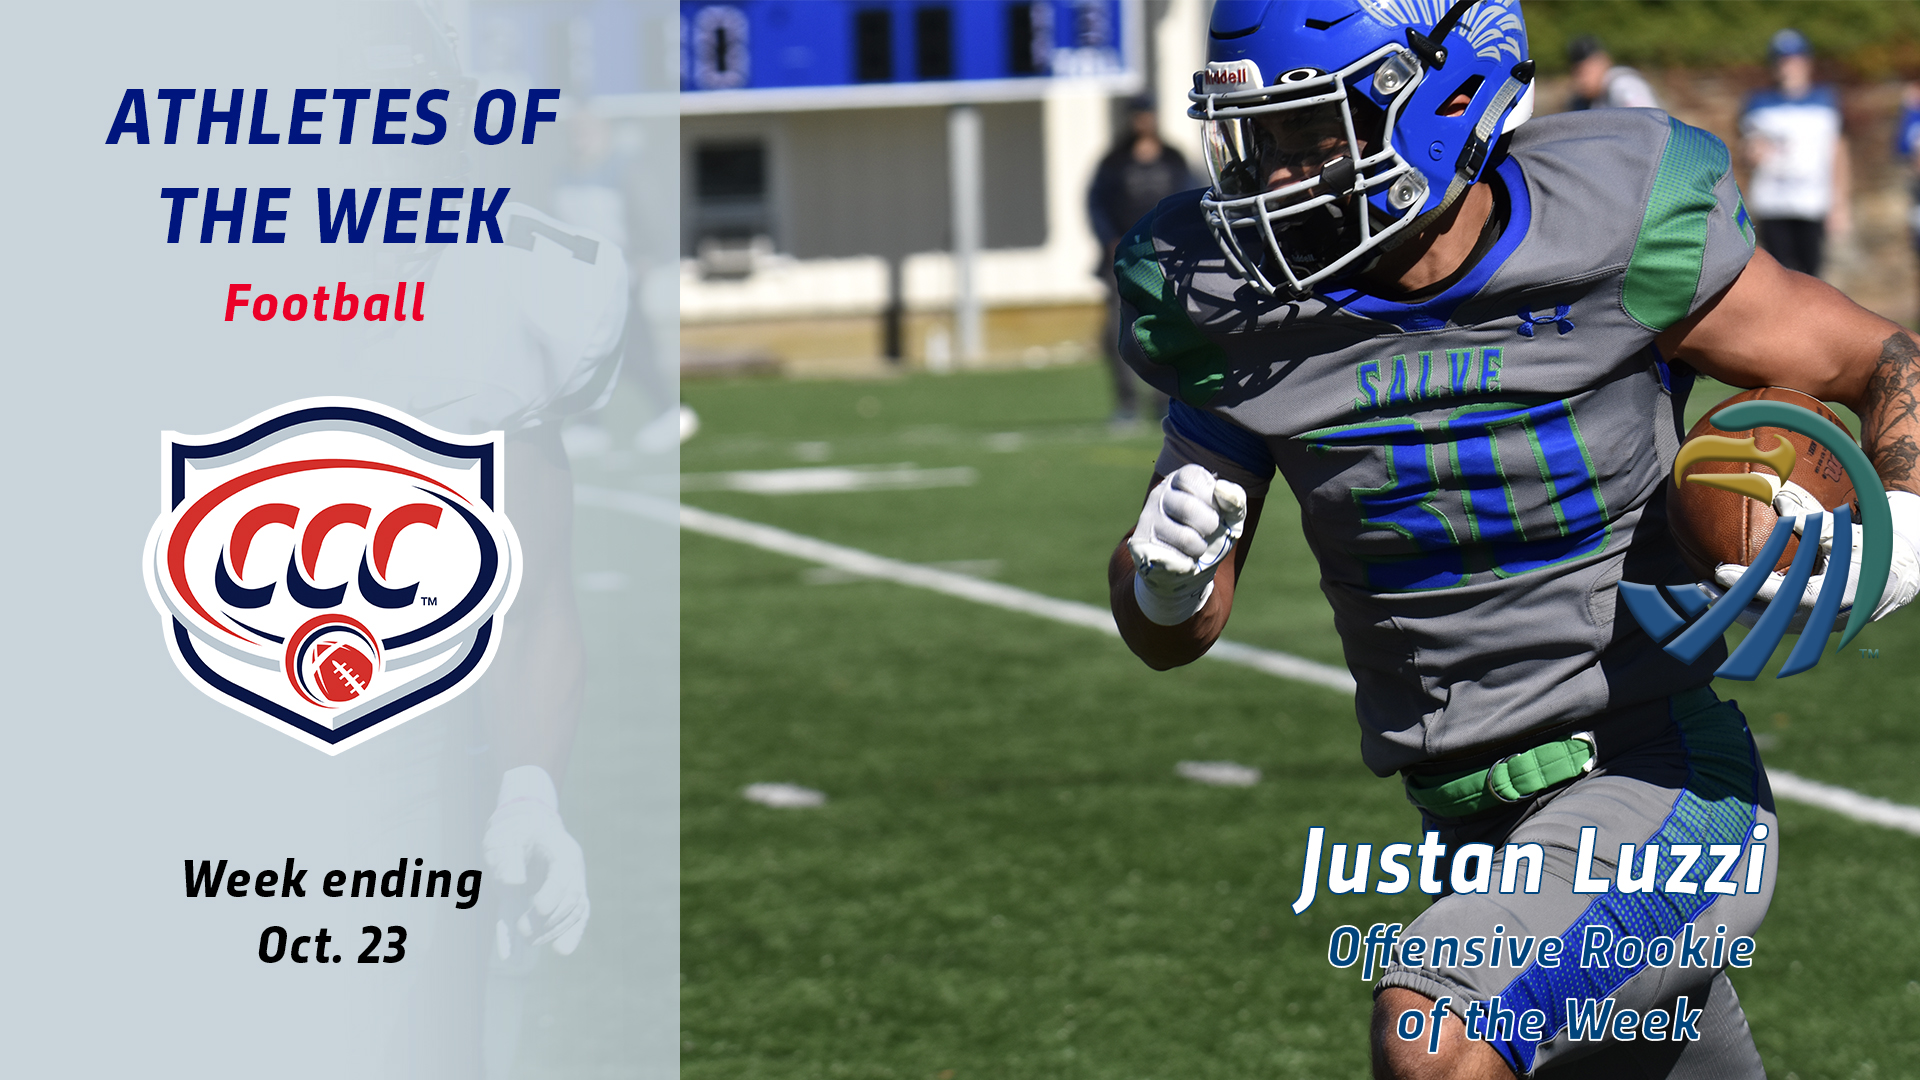 Justan Luzzi was named CCC Offensive Rookie of the Week.